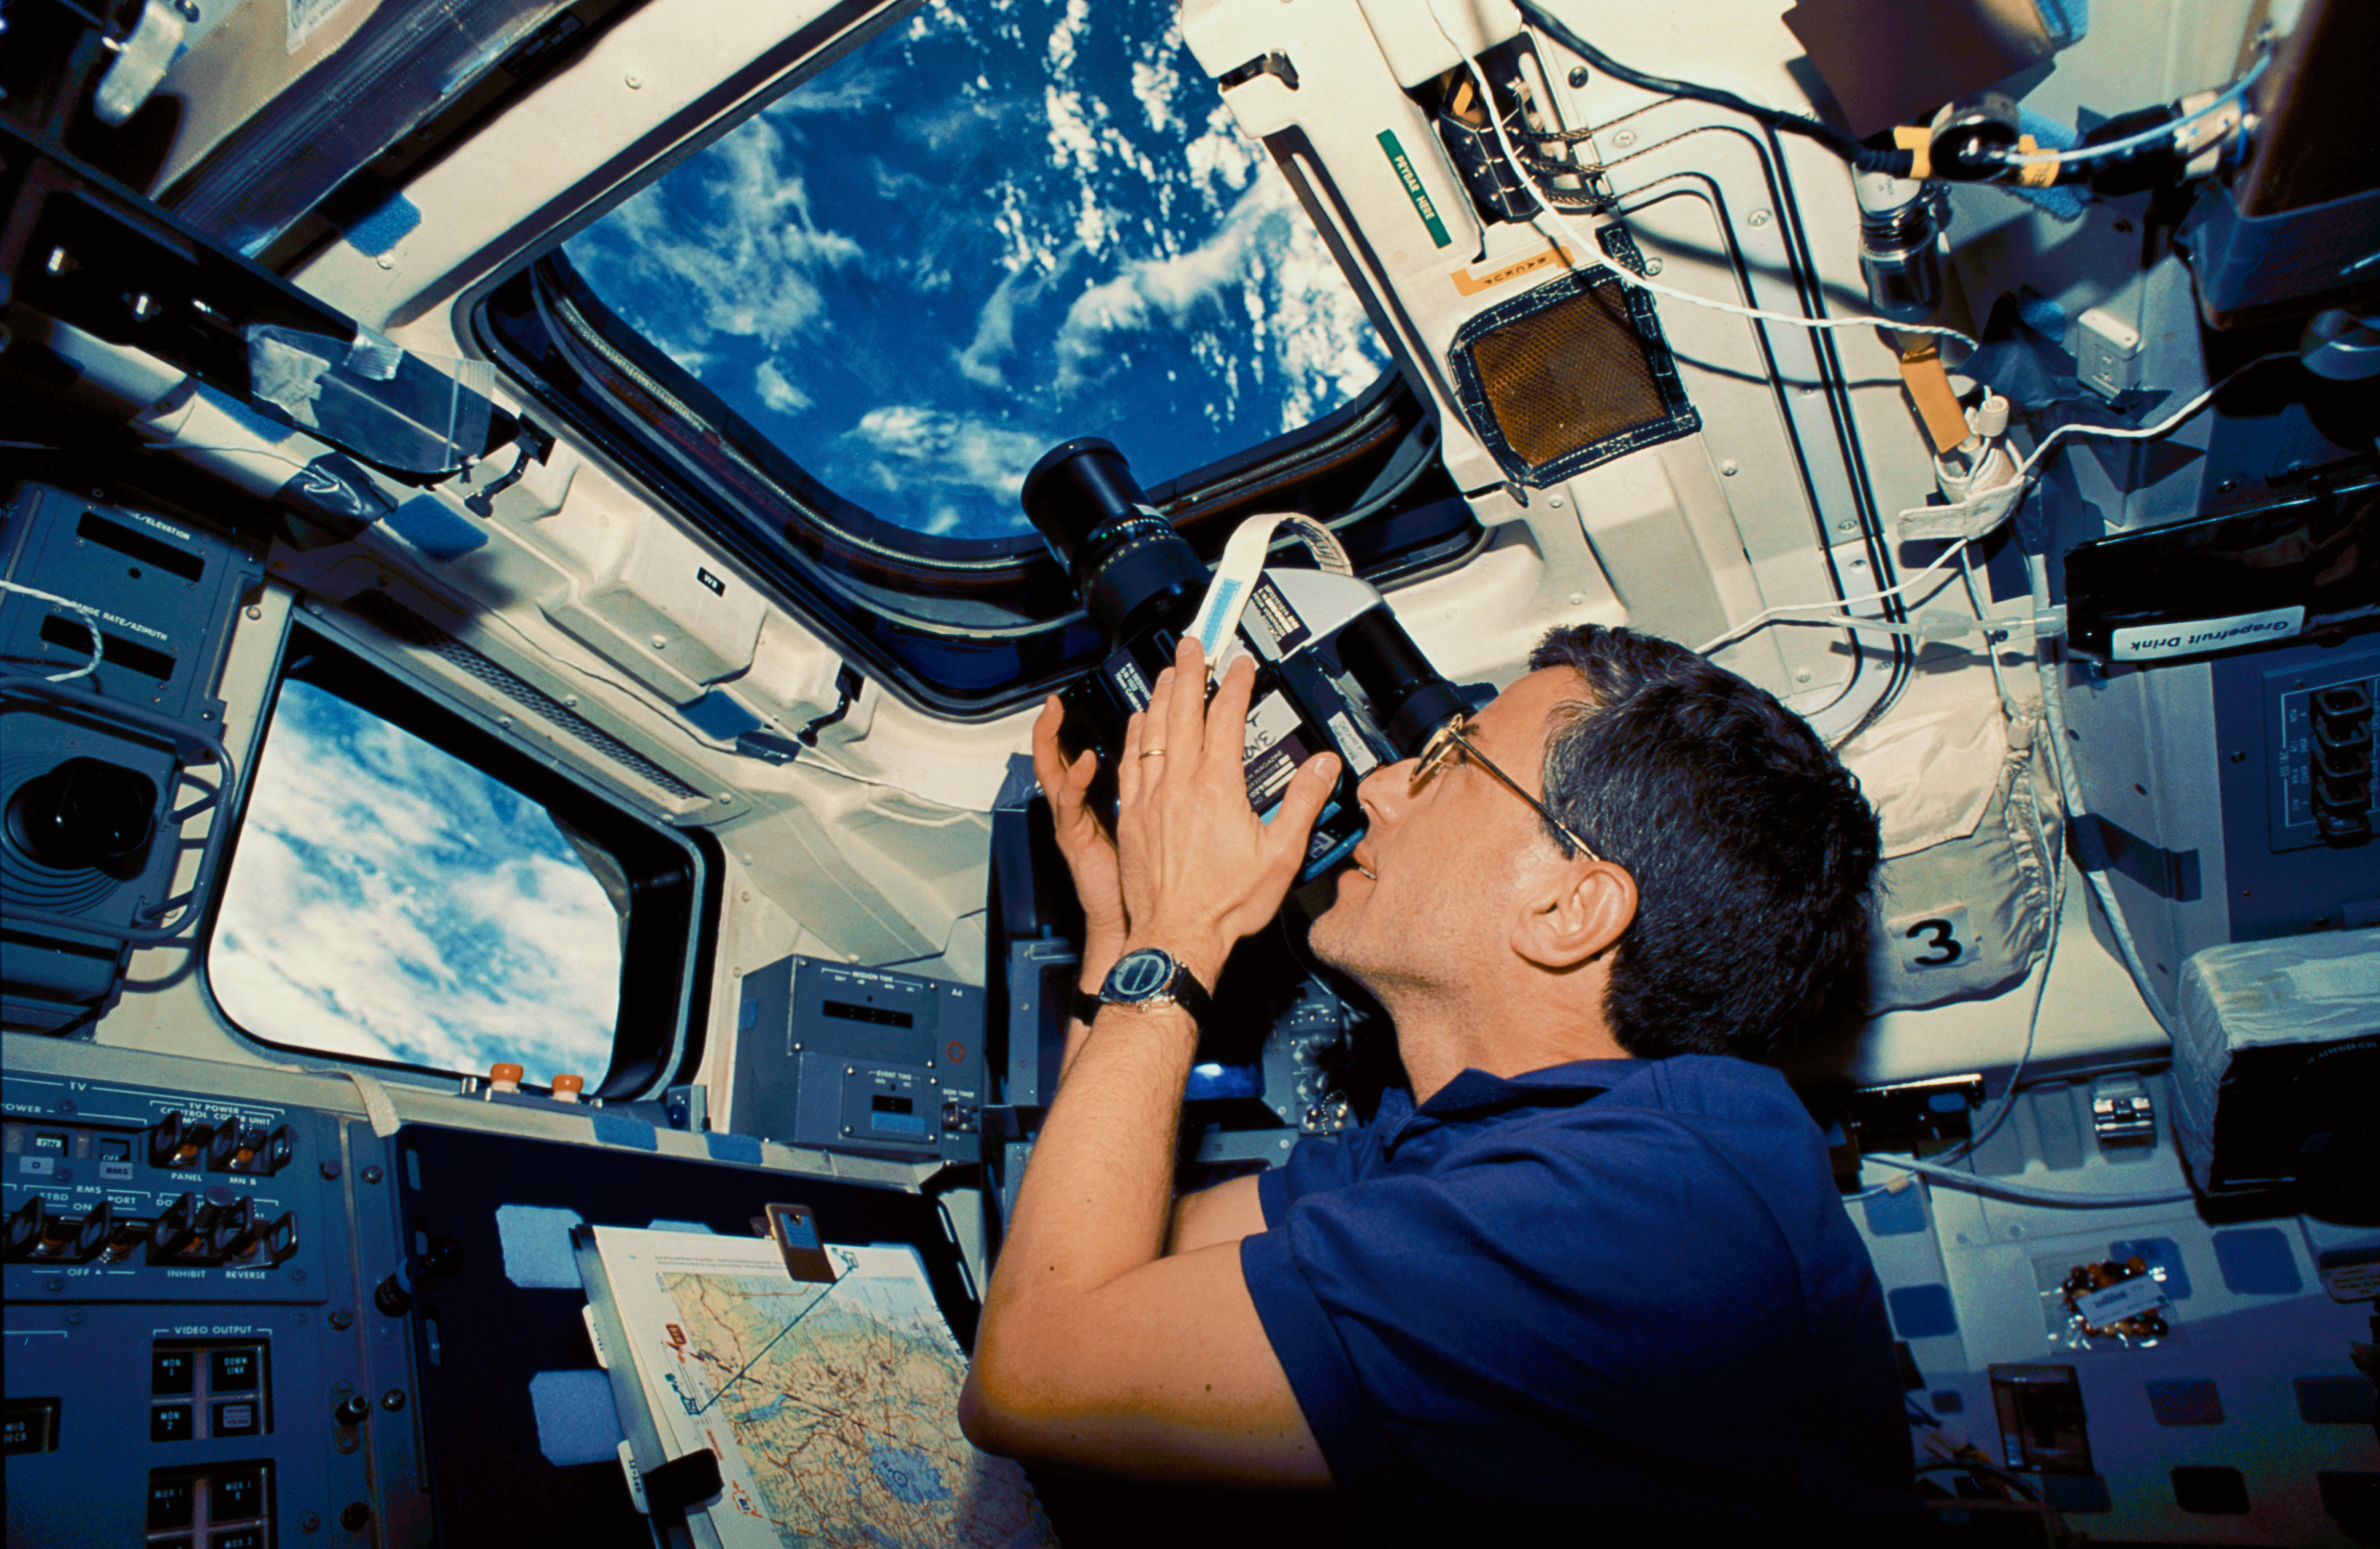 Jay with Hasselblad camera on STS-59, one of the images Jay Apt can show as an astronaut speaker.